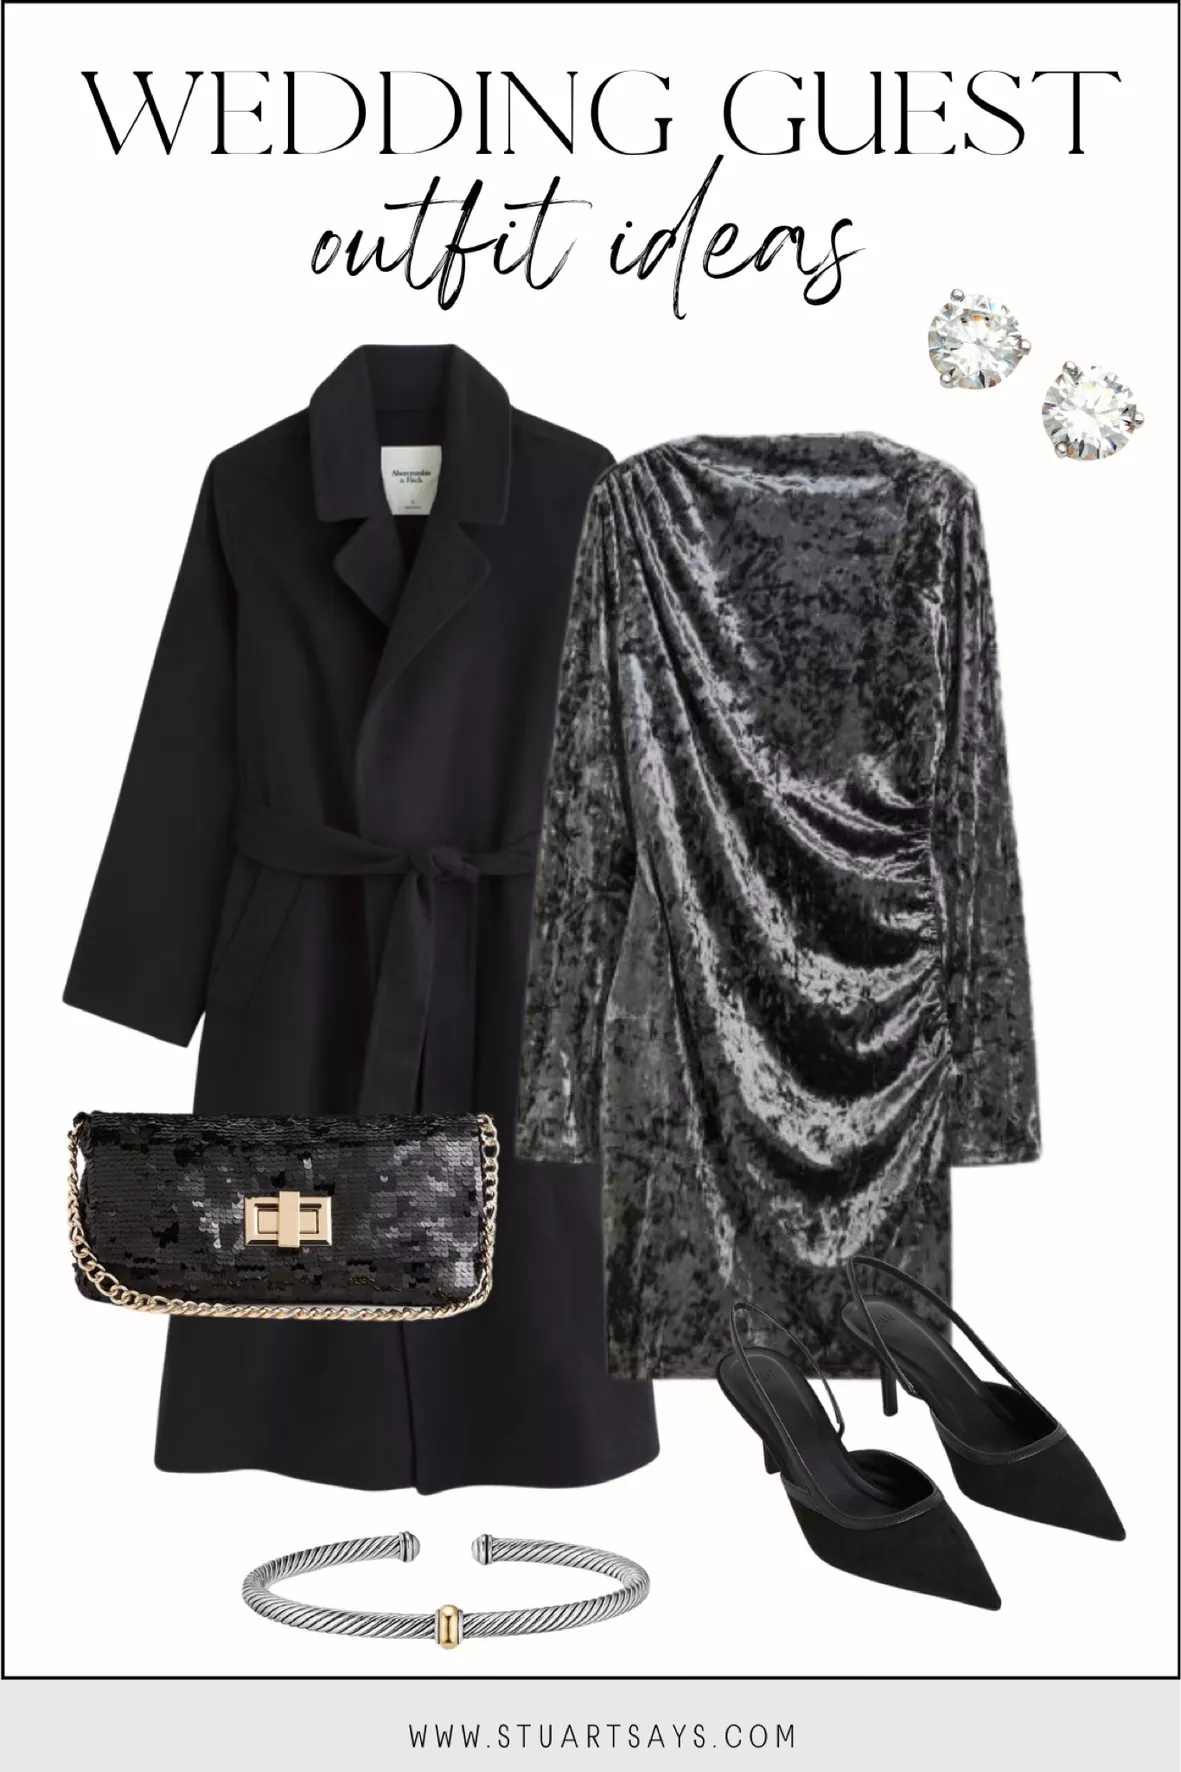 Winter Wedding Guest Outfit Ideas